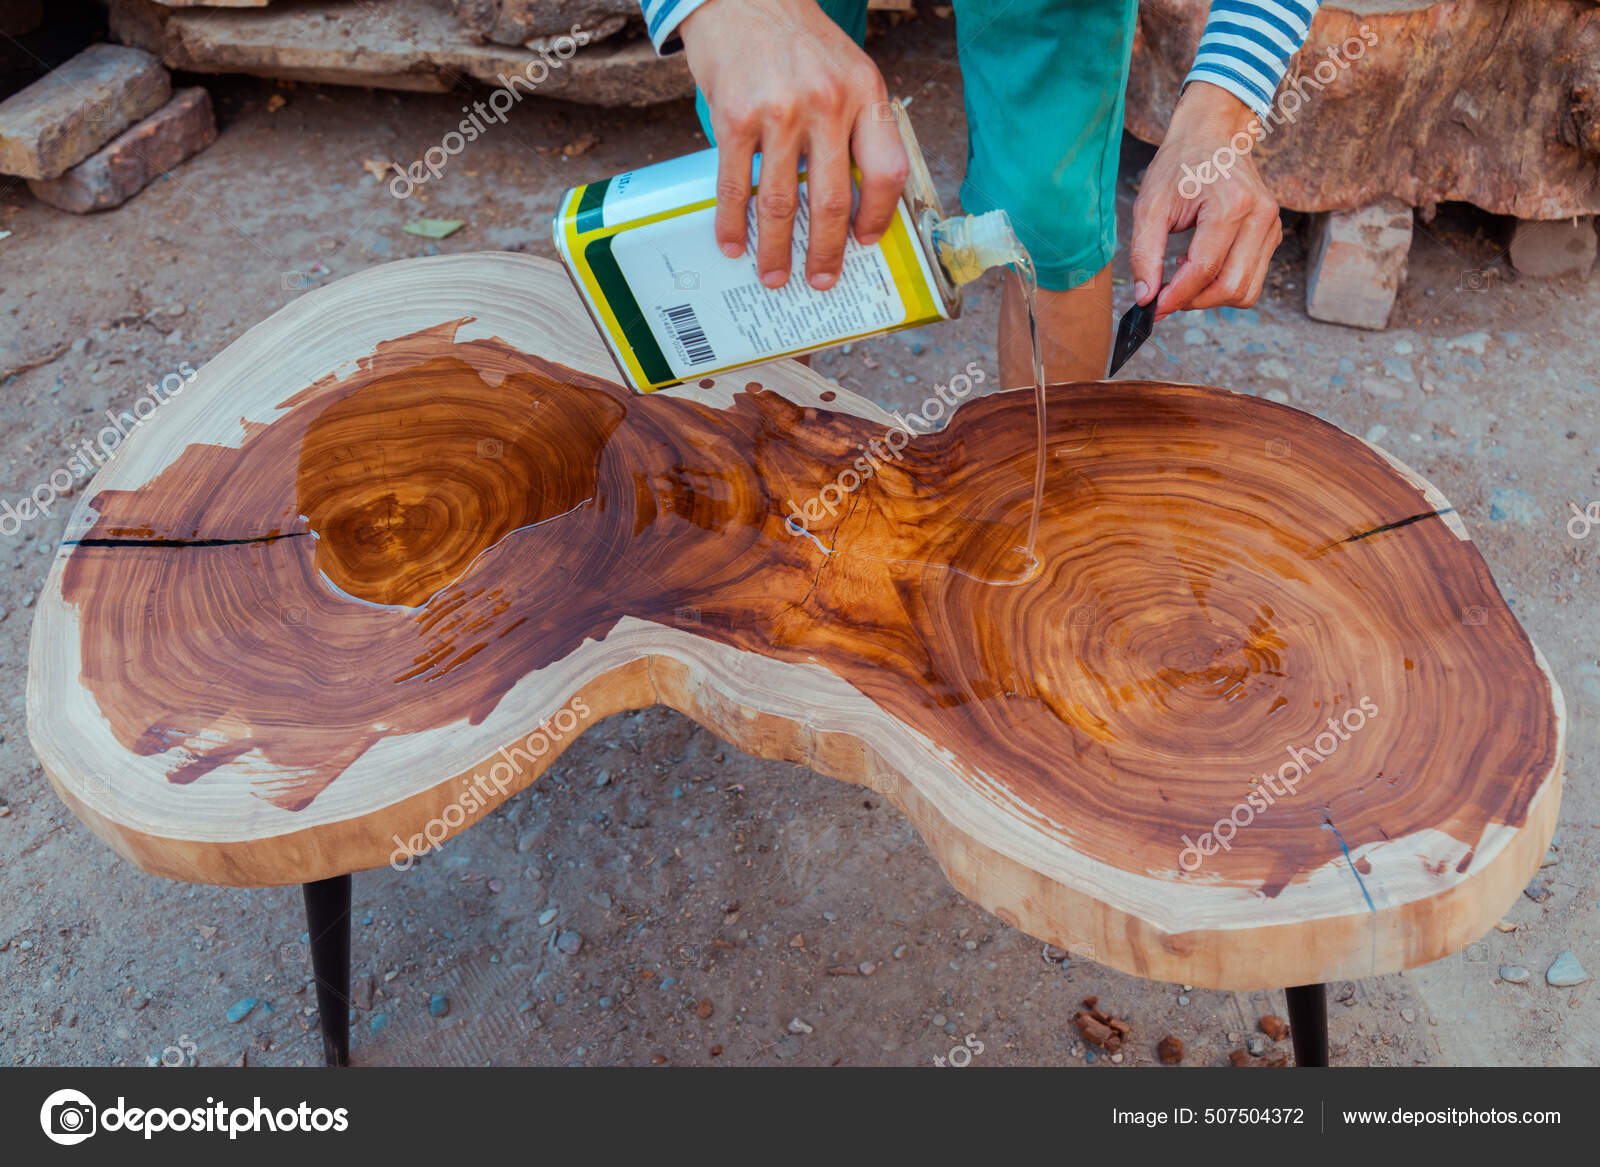 Carpenter Pouring Linseed Oil Wooden Table Process Making Wood